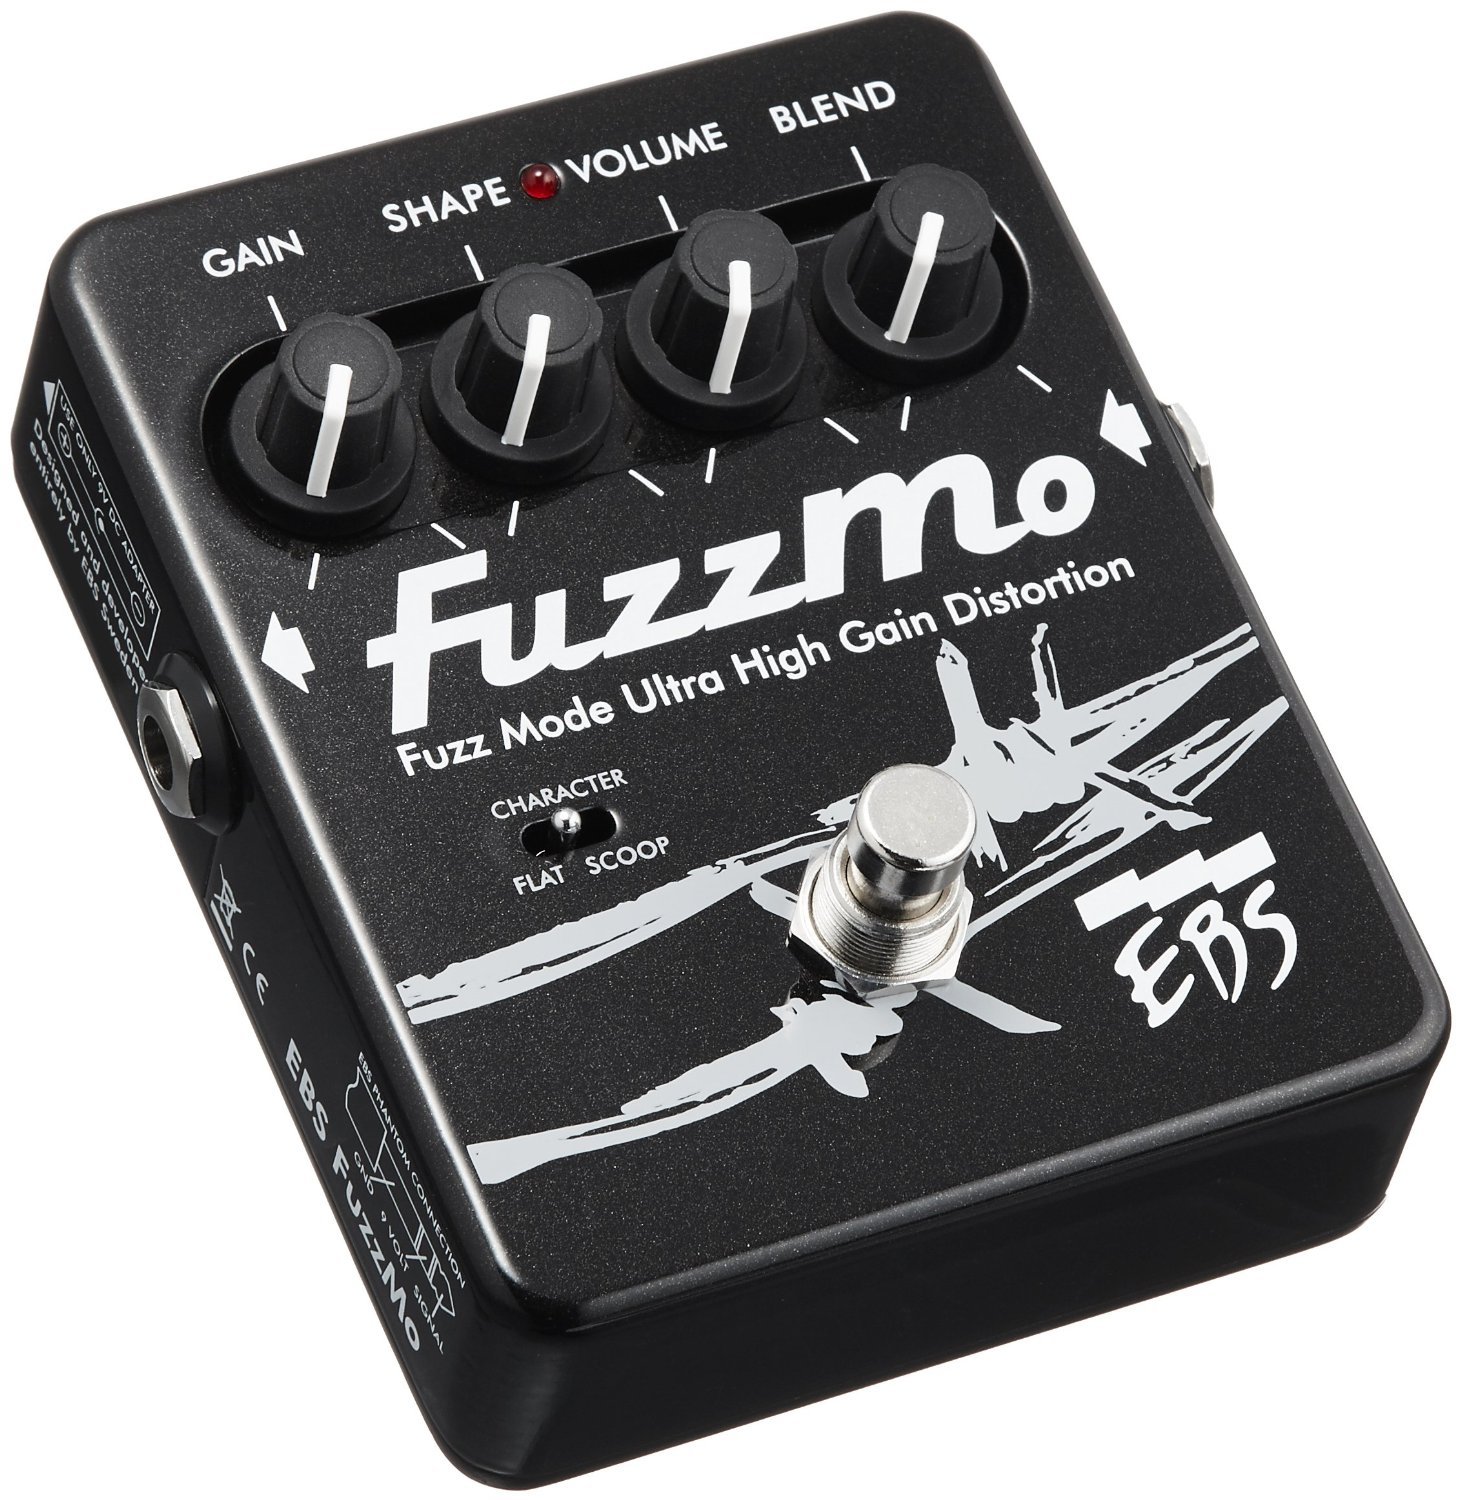 Ebs Fuzzmo Fuzz Mode Distorsion - Overdrive, distortion, fuzz effect pedal for bass - Variation 2